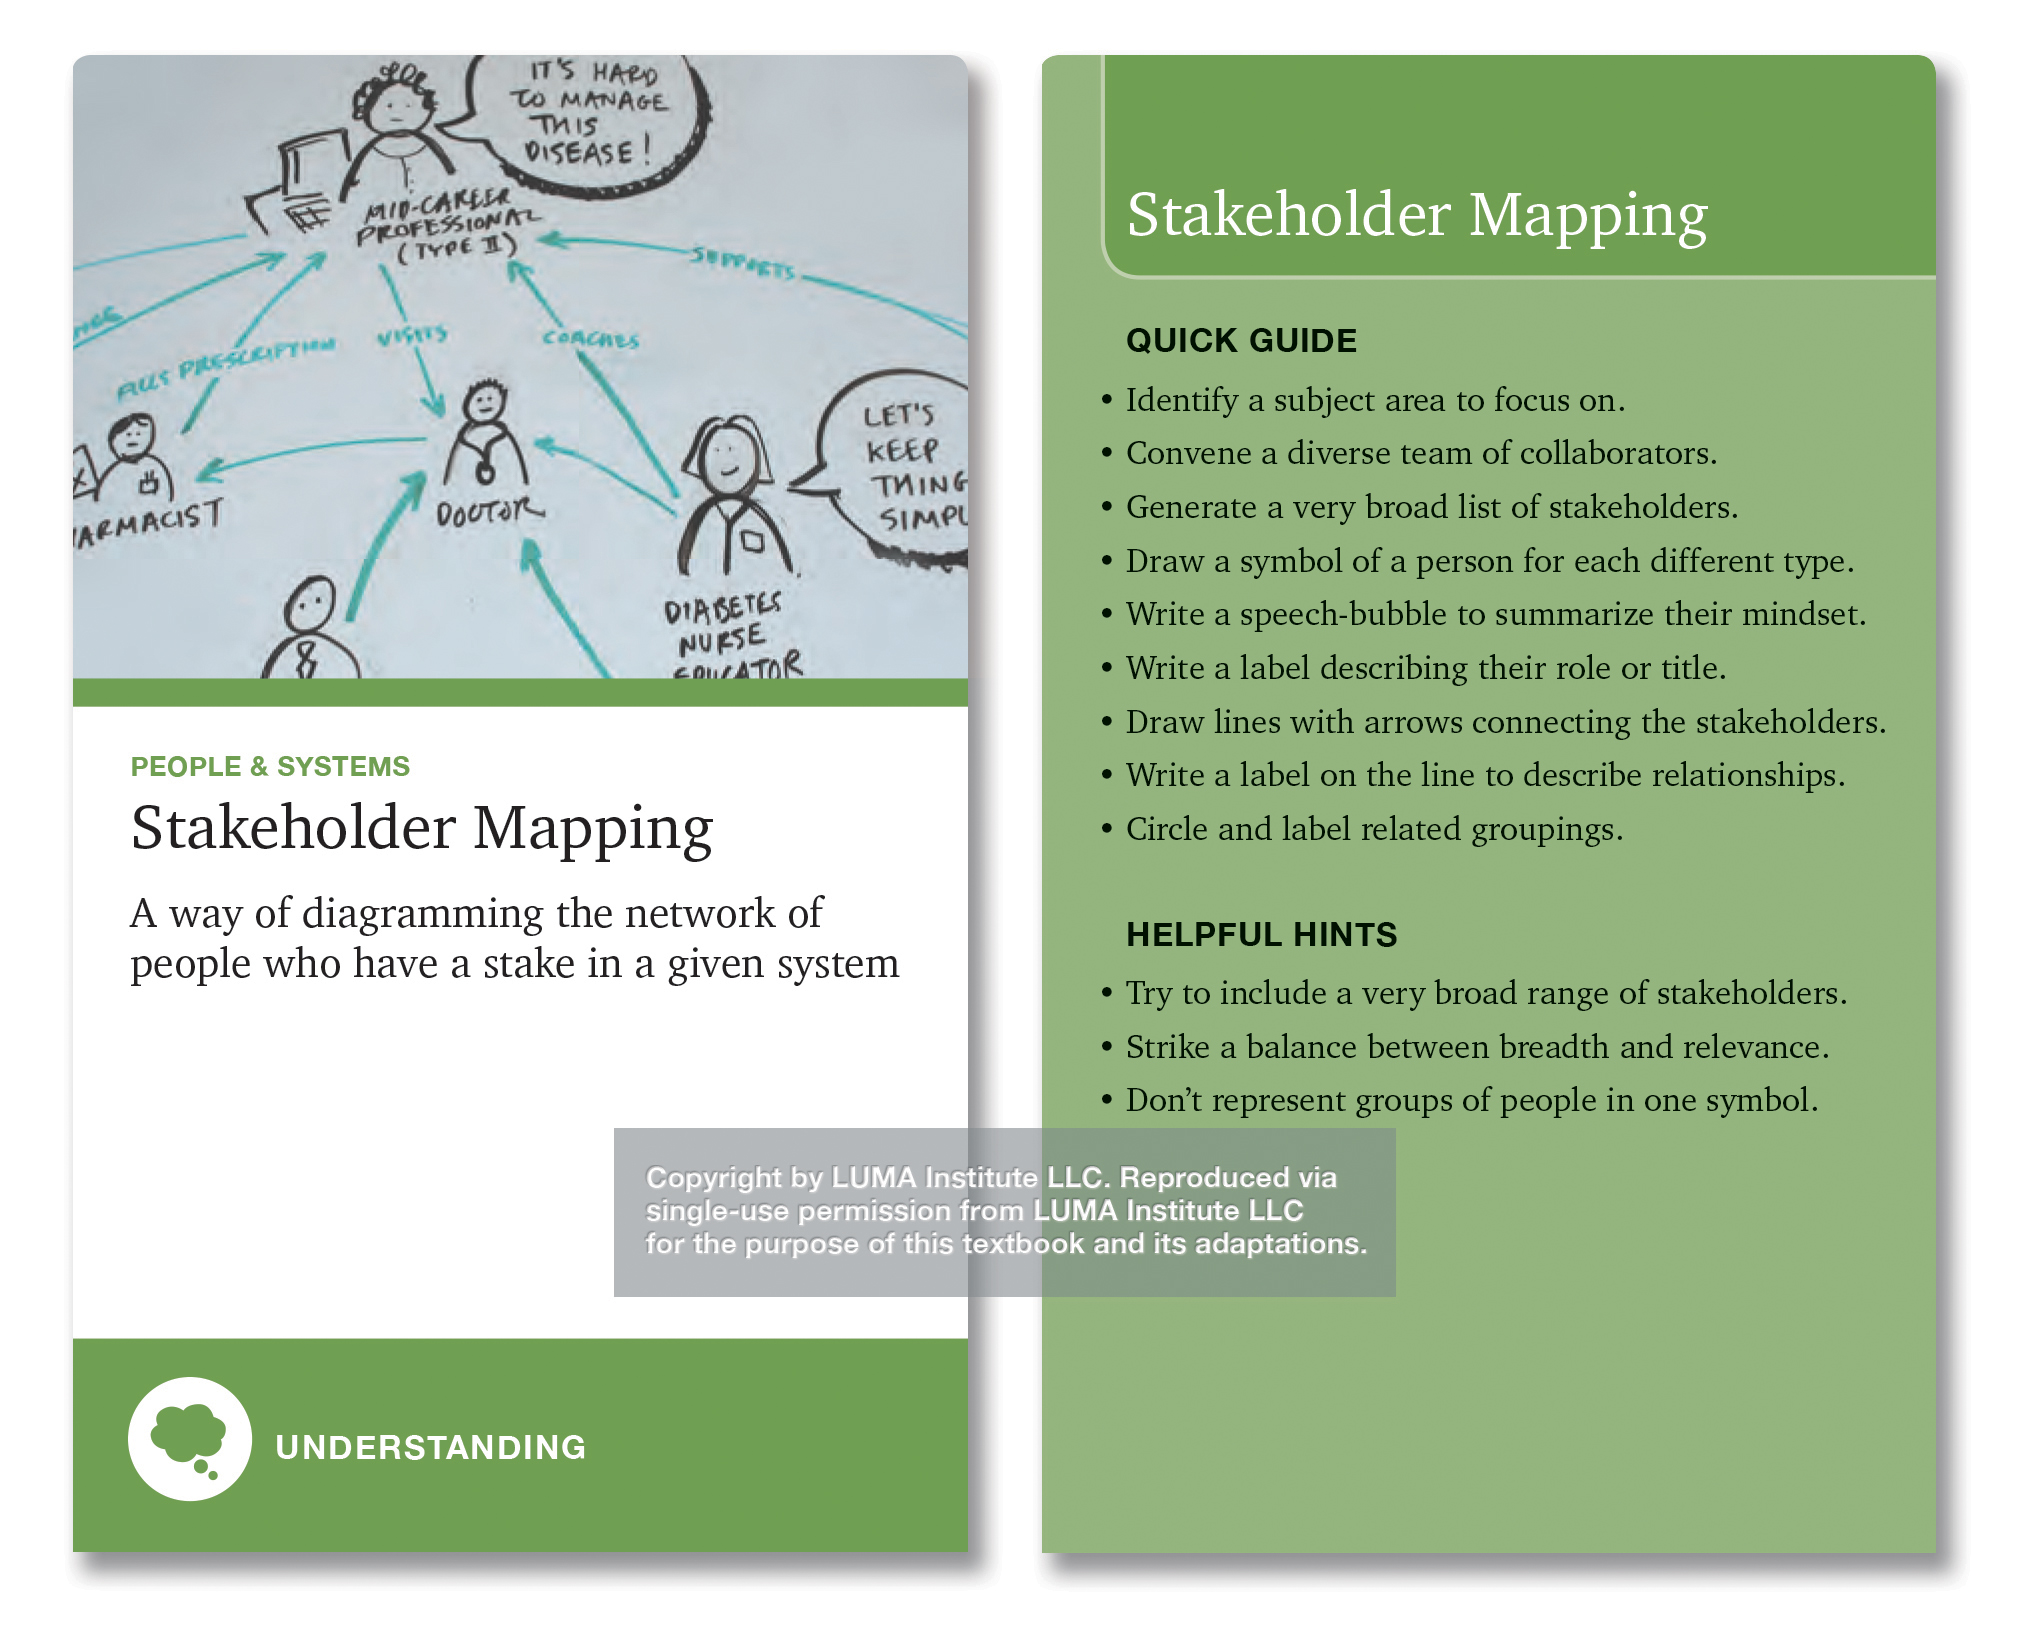 Depicts Stakeholder Mapping, “a way of diagramming the network of people who have a stake in a given system.” Quick guide bulleted tips include identifying a subject area, convening diverse collaborators, generating a broad list of stakeholders, summarizing their mindsets, describing their roles, connecting them with lines describing their relationships and circling and labeling related groupings.